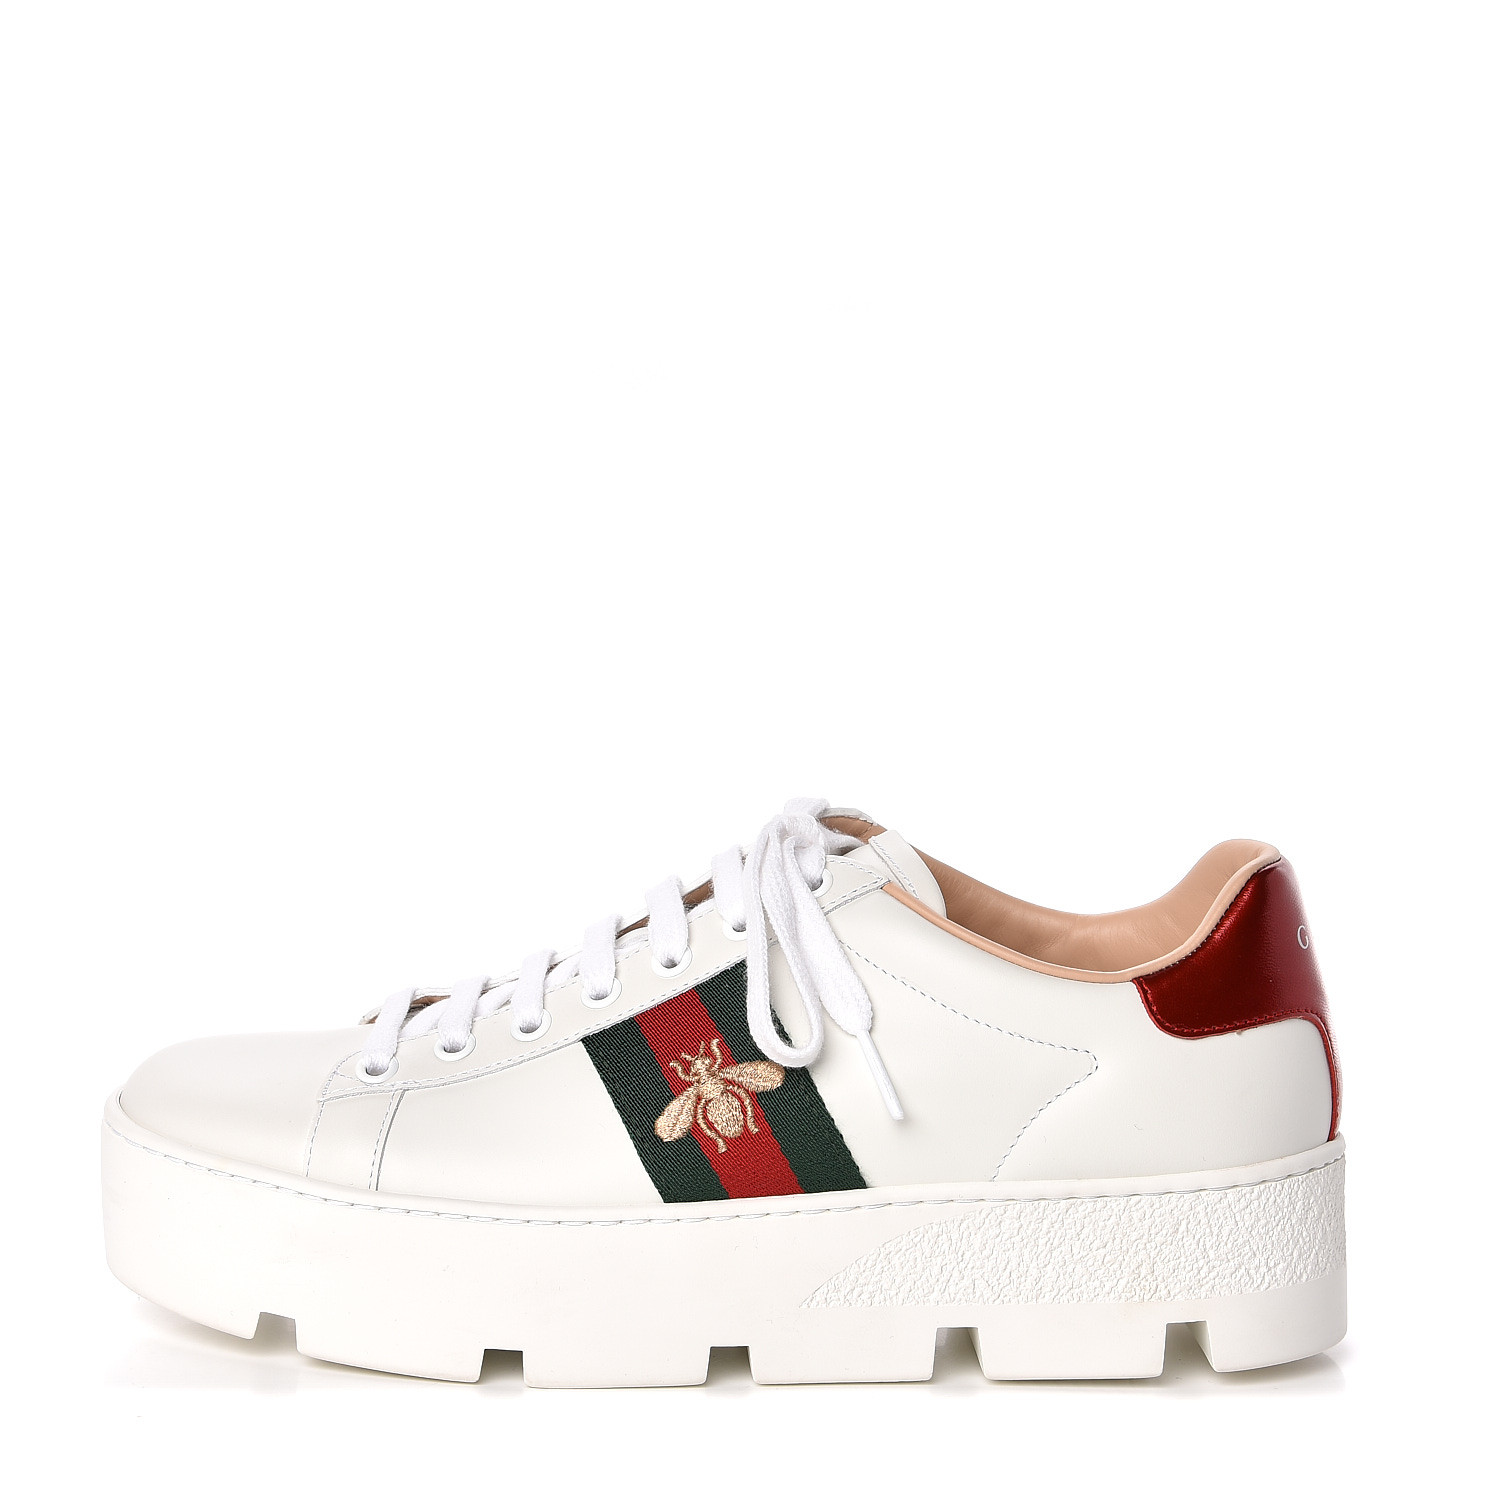 GUCCI Calfskin Embroidered Ace Platform Sneakers 39 White 496353